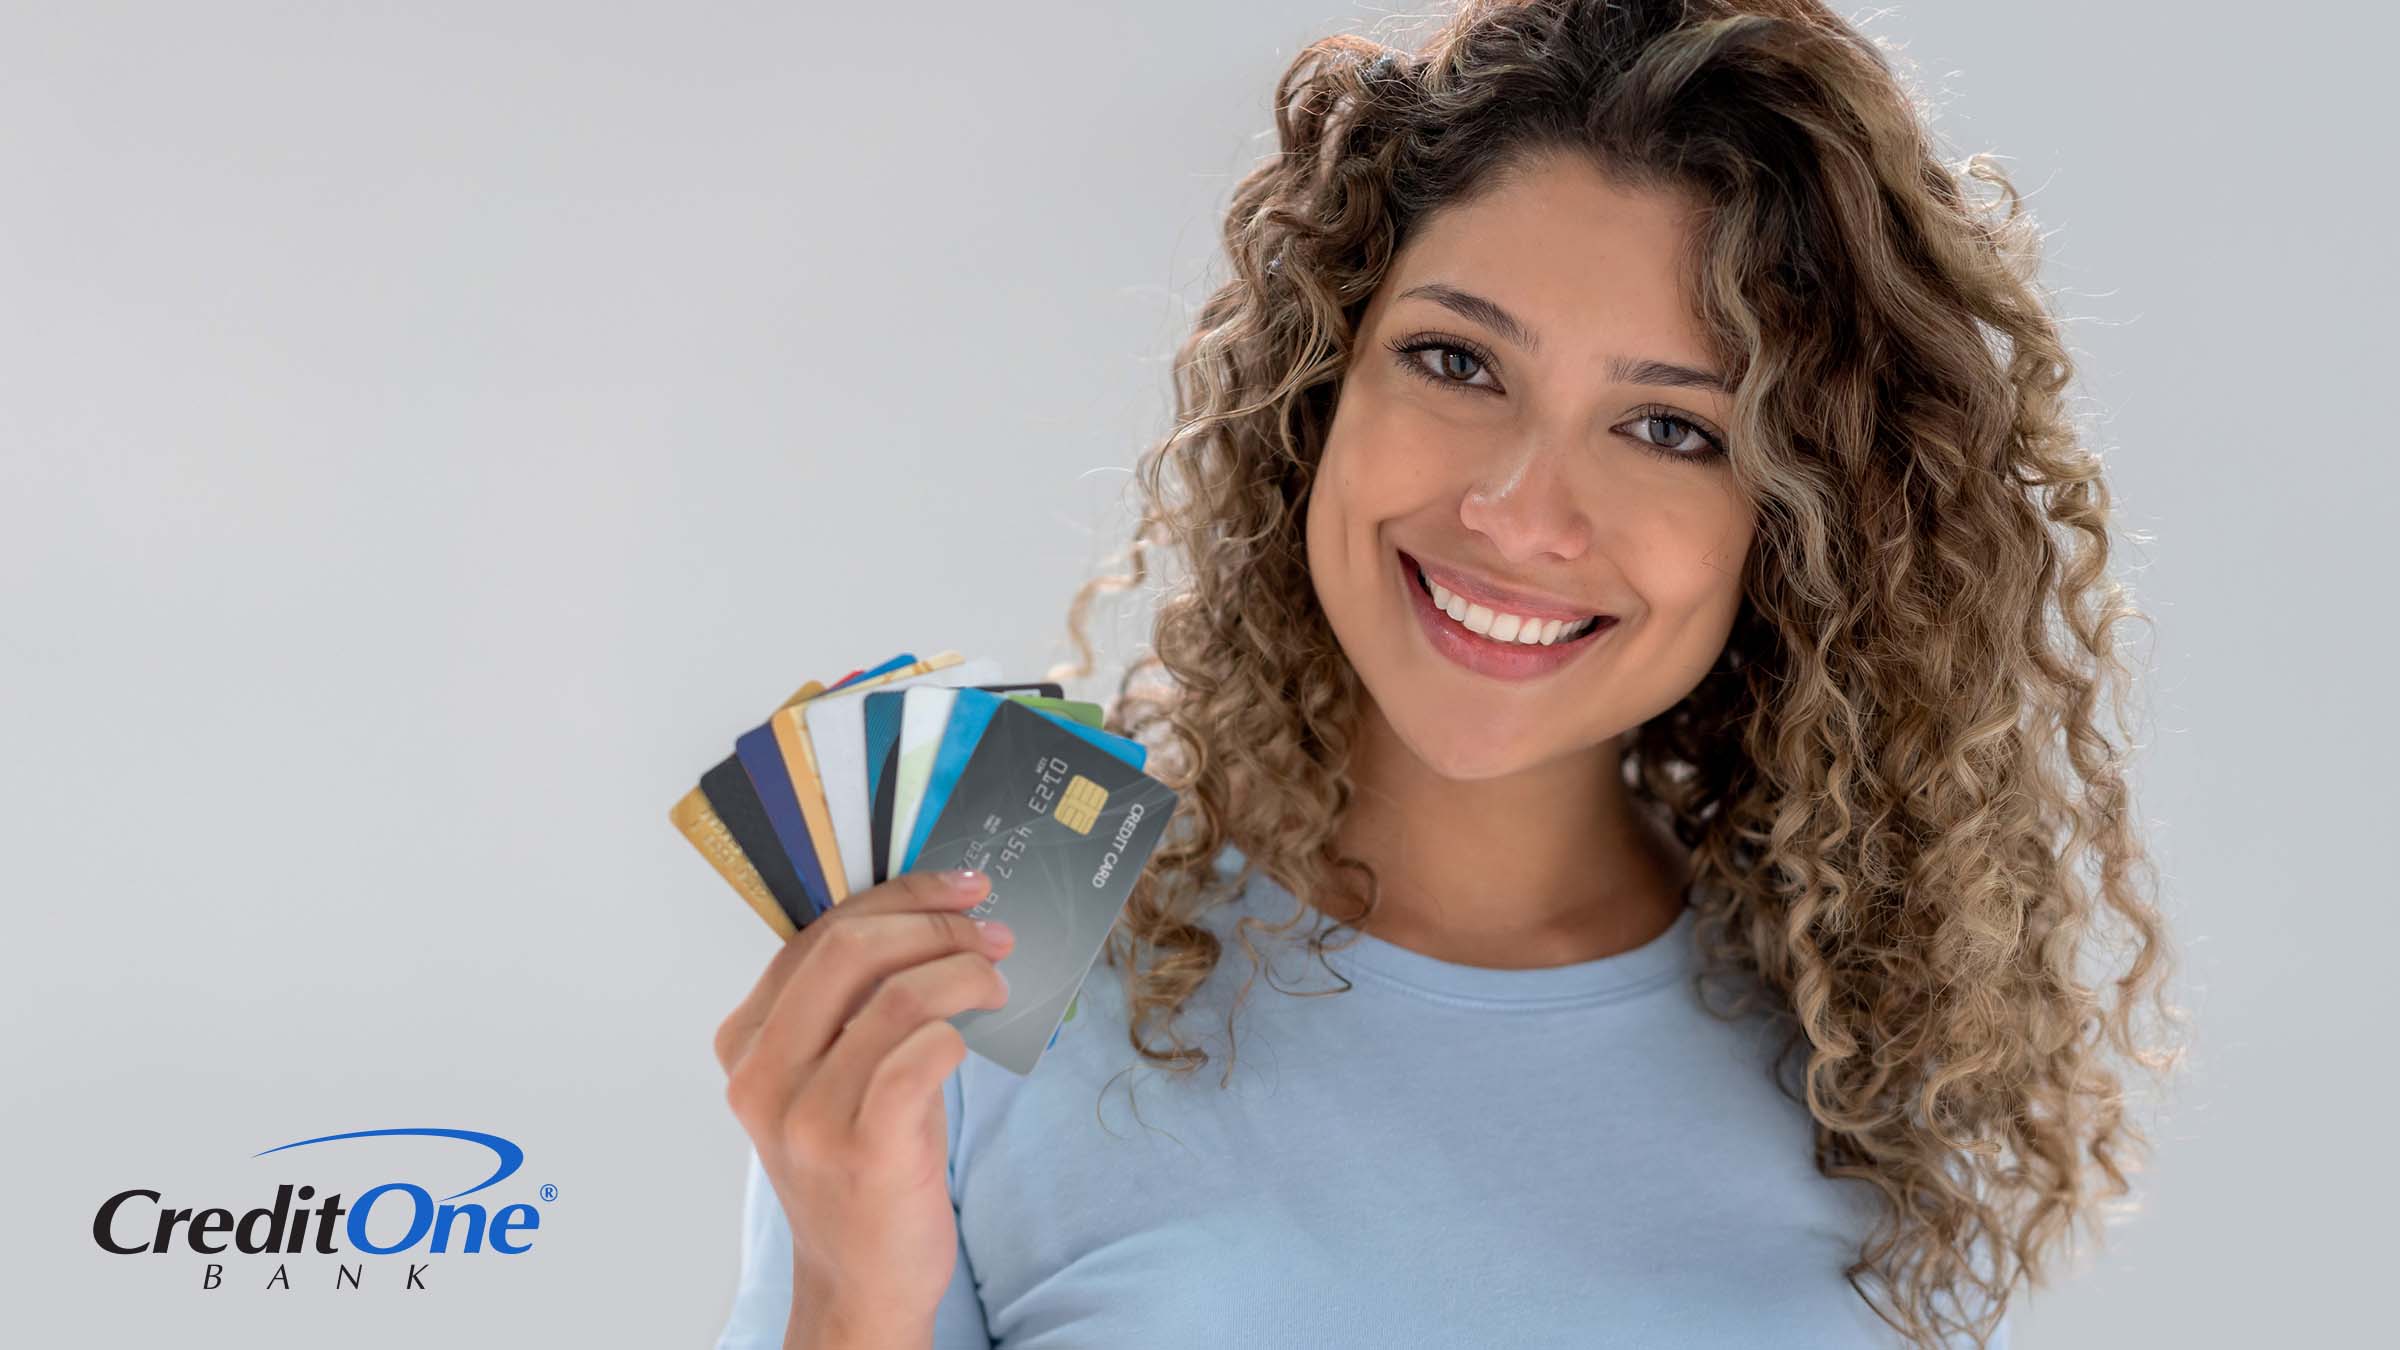 A smiling woman holds a fan of multiple credit cards which she uses for maximum rewards.